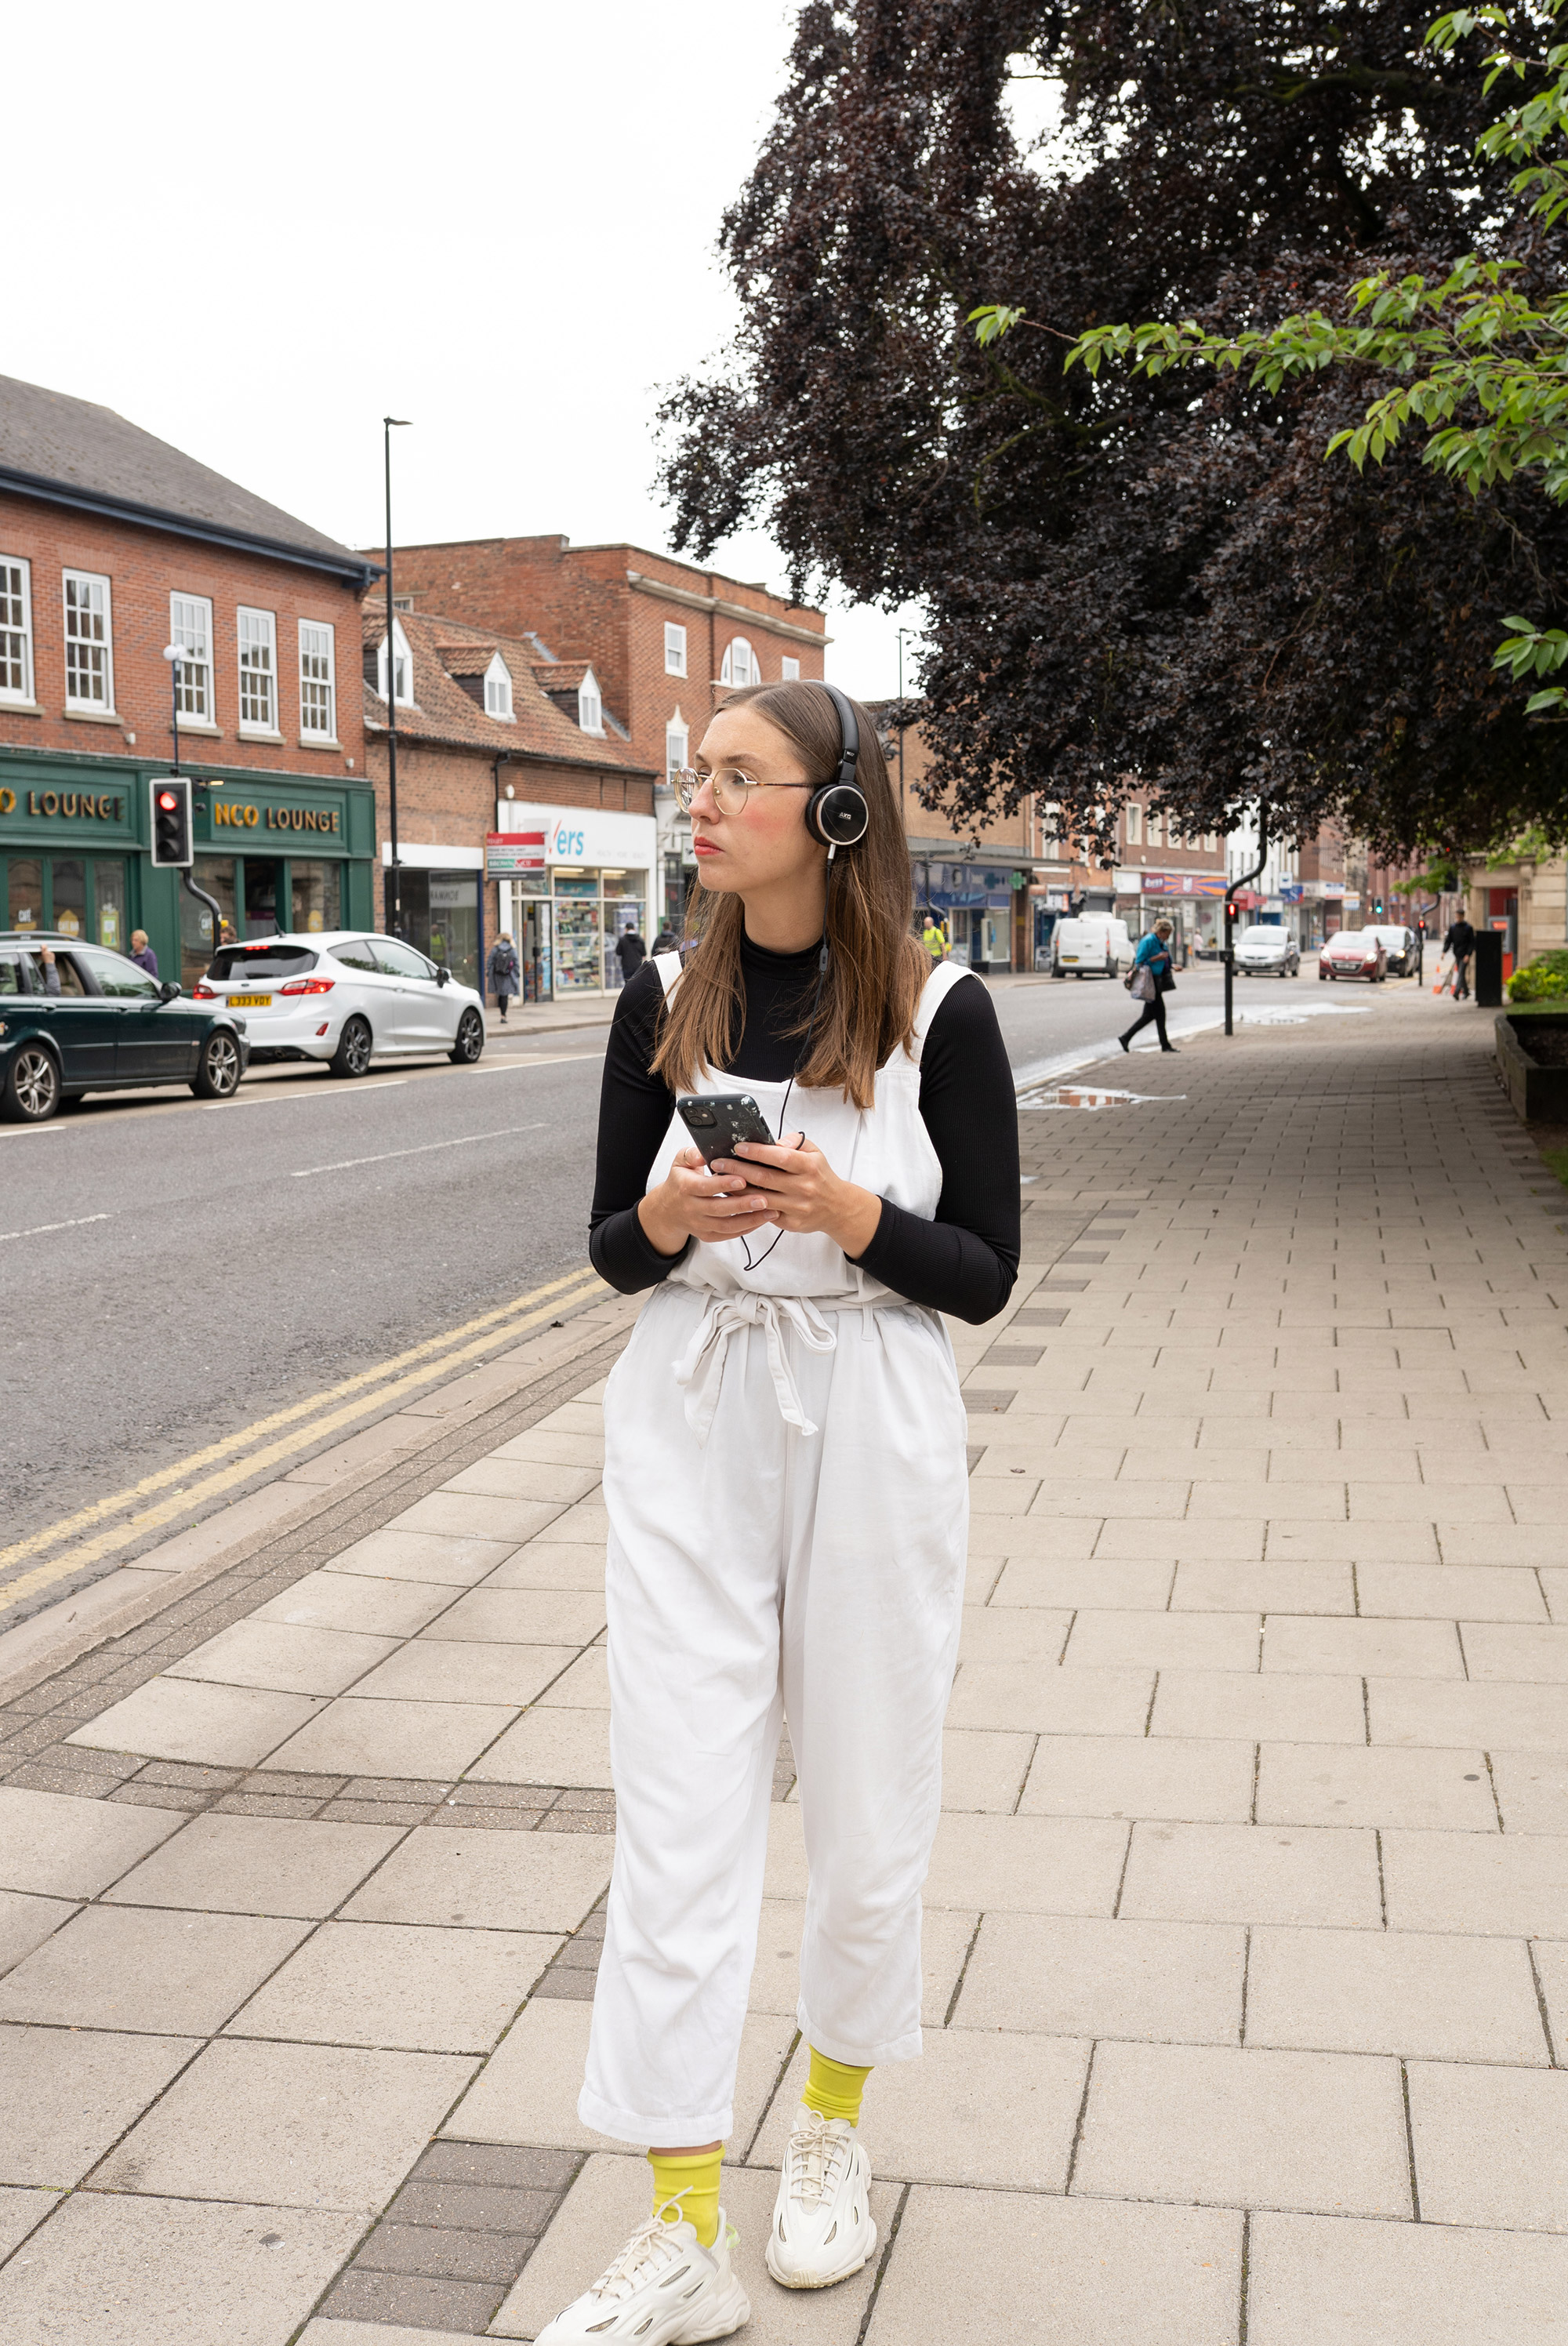 Woman walking down a high street listening to something on headphones.